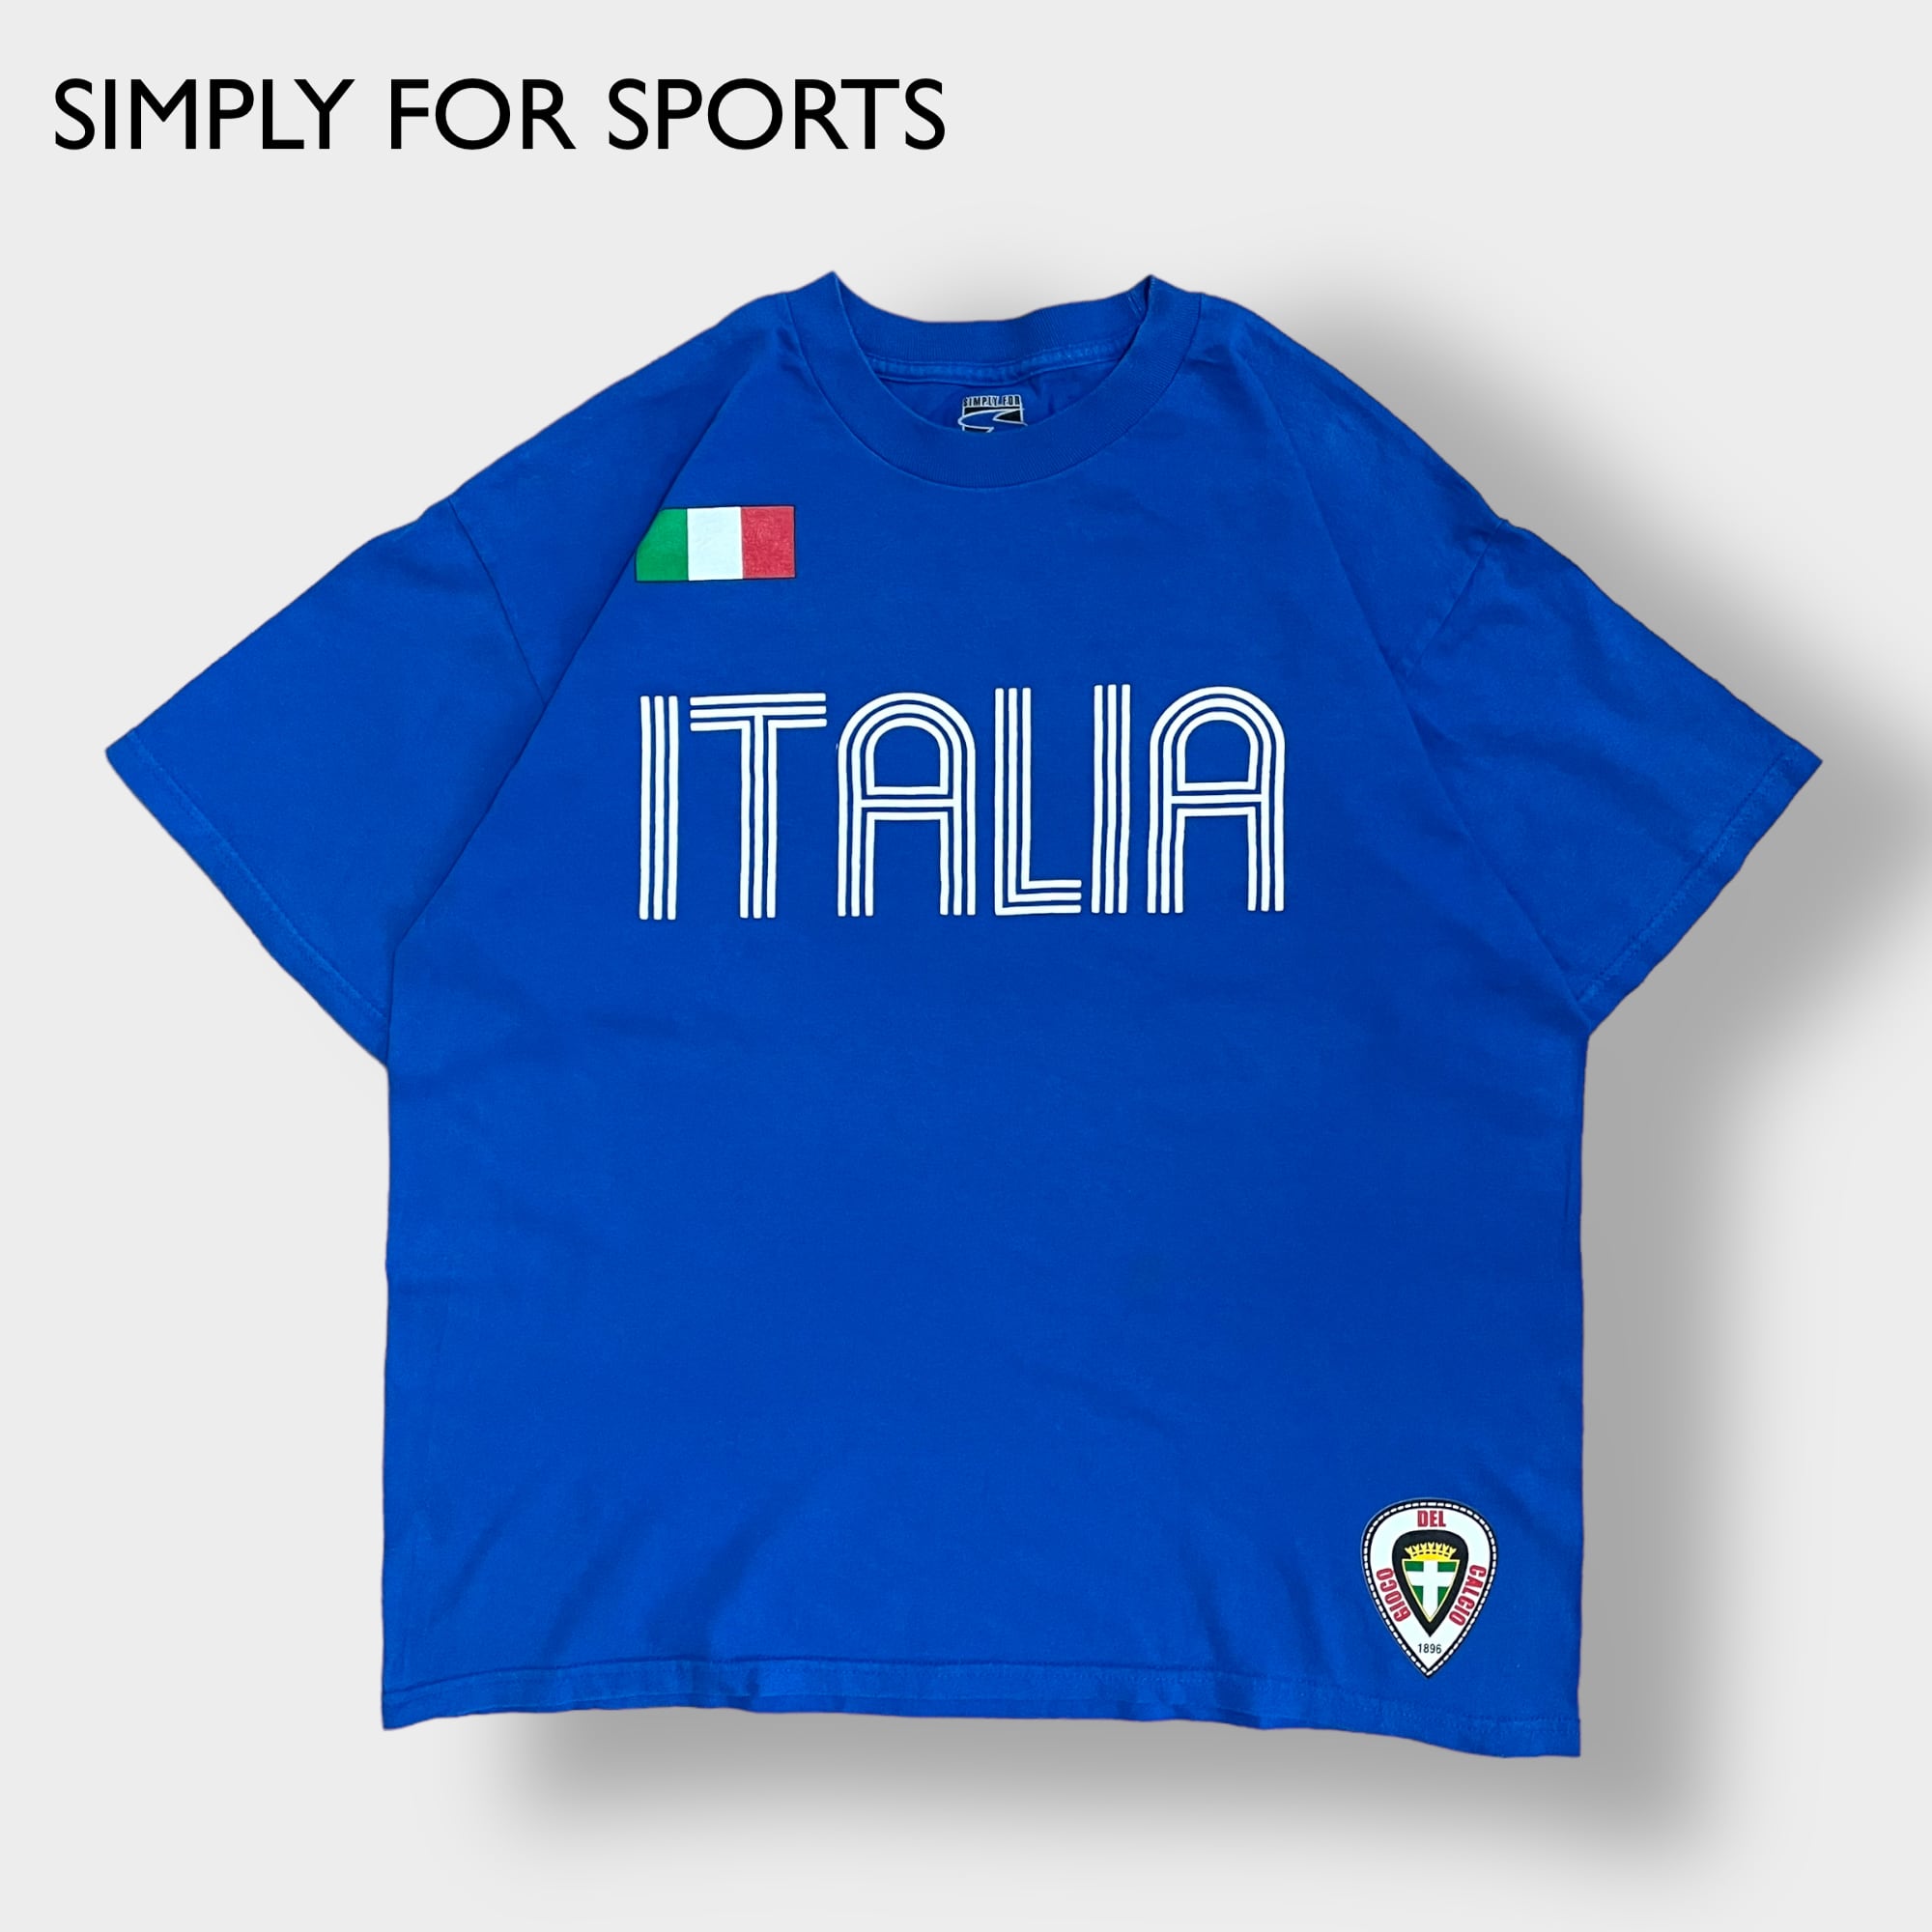 SIMPLY FOR SPORTS】ITALIA イタリア代表 サッカー ロゴ プリント T ...